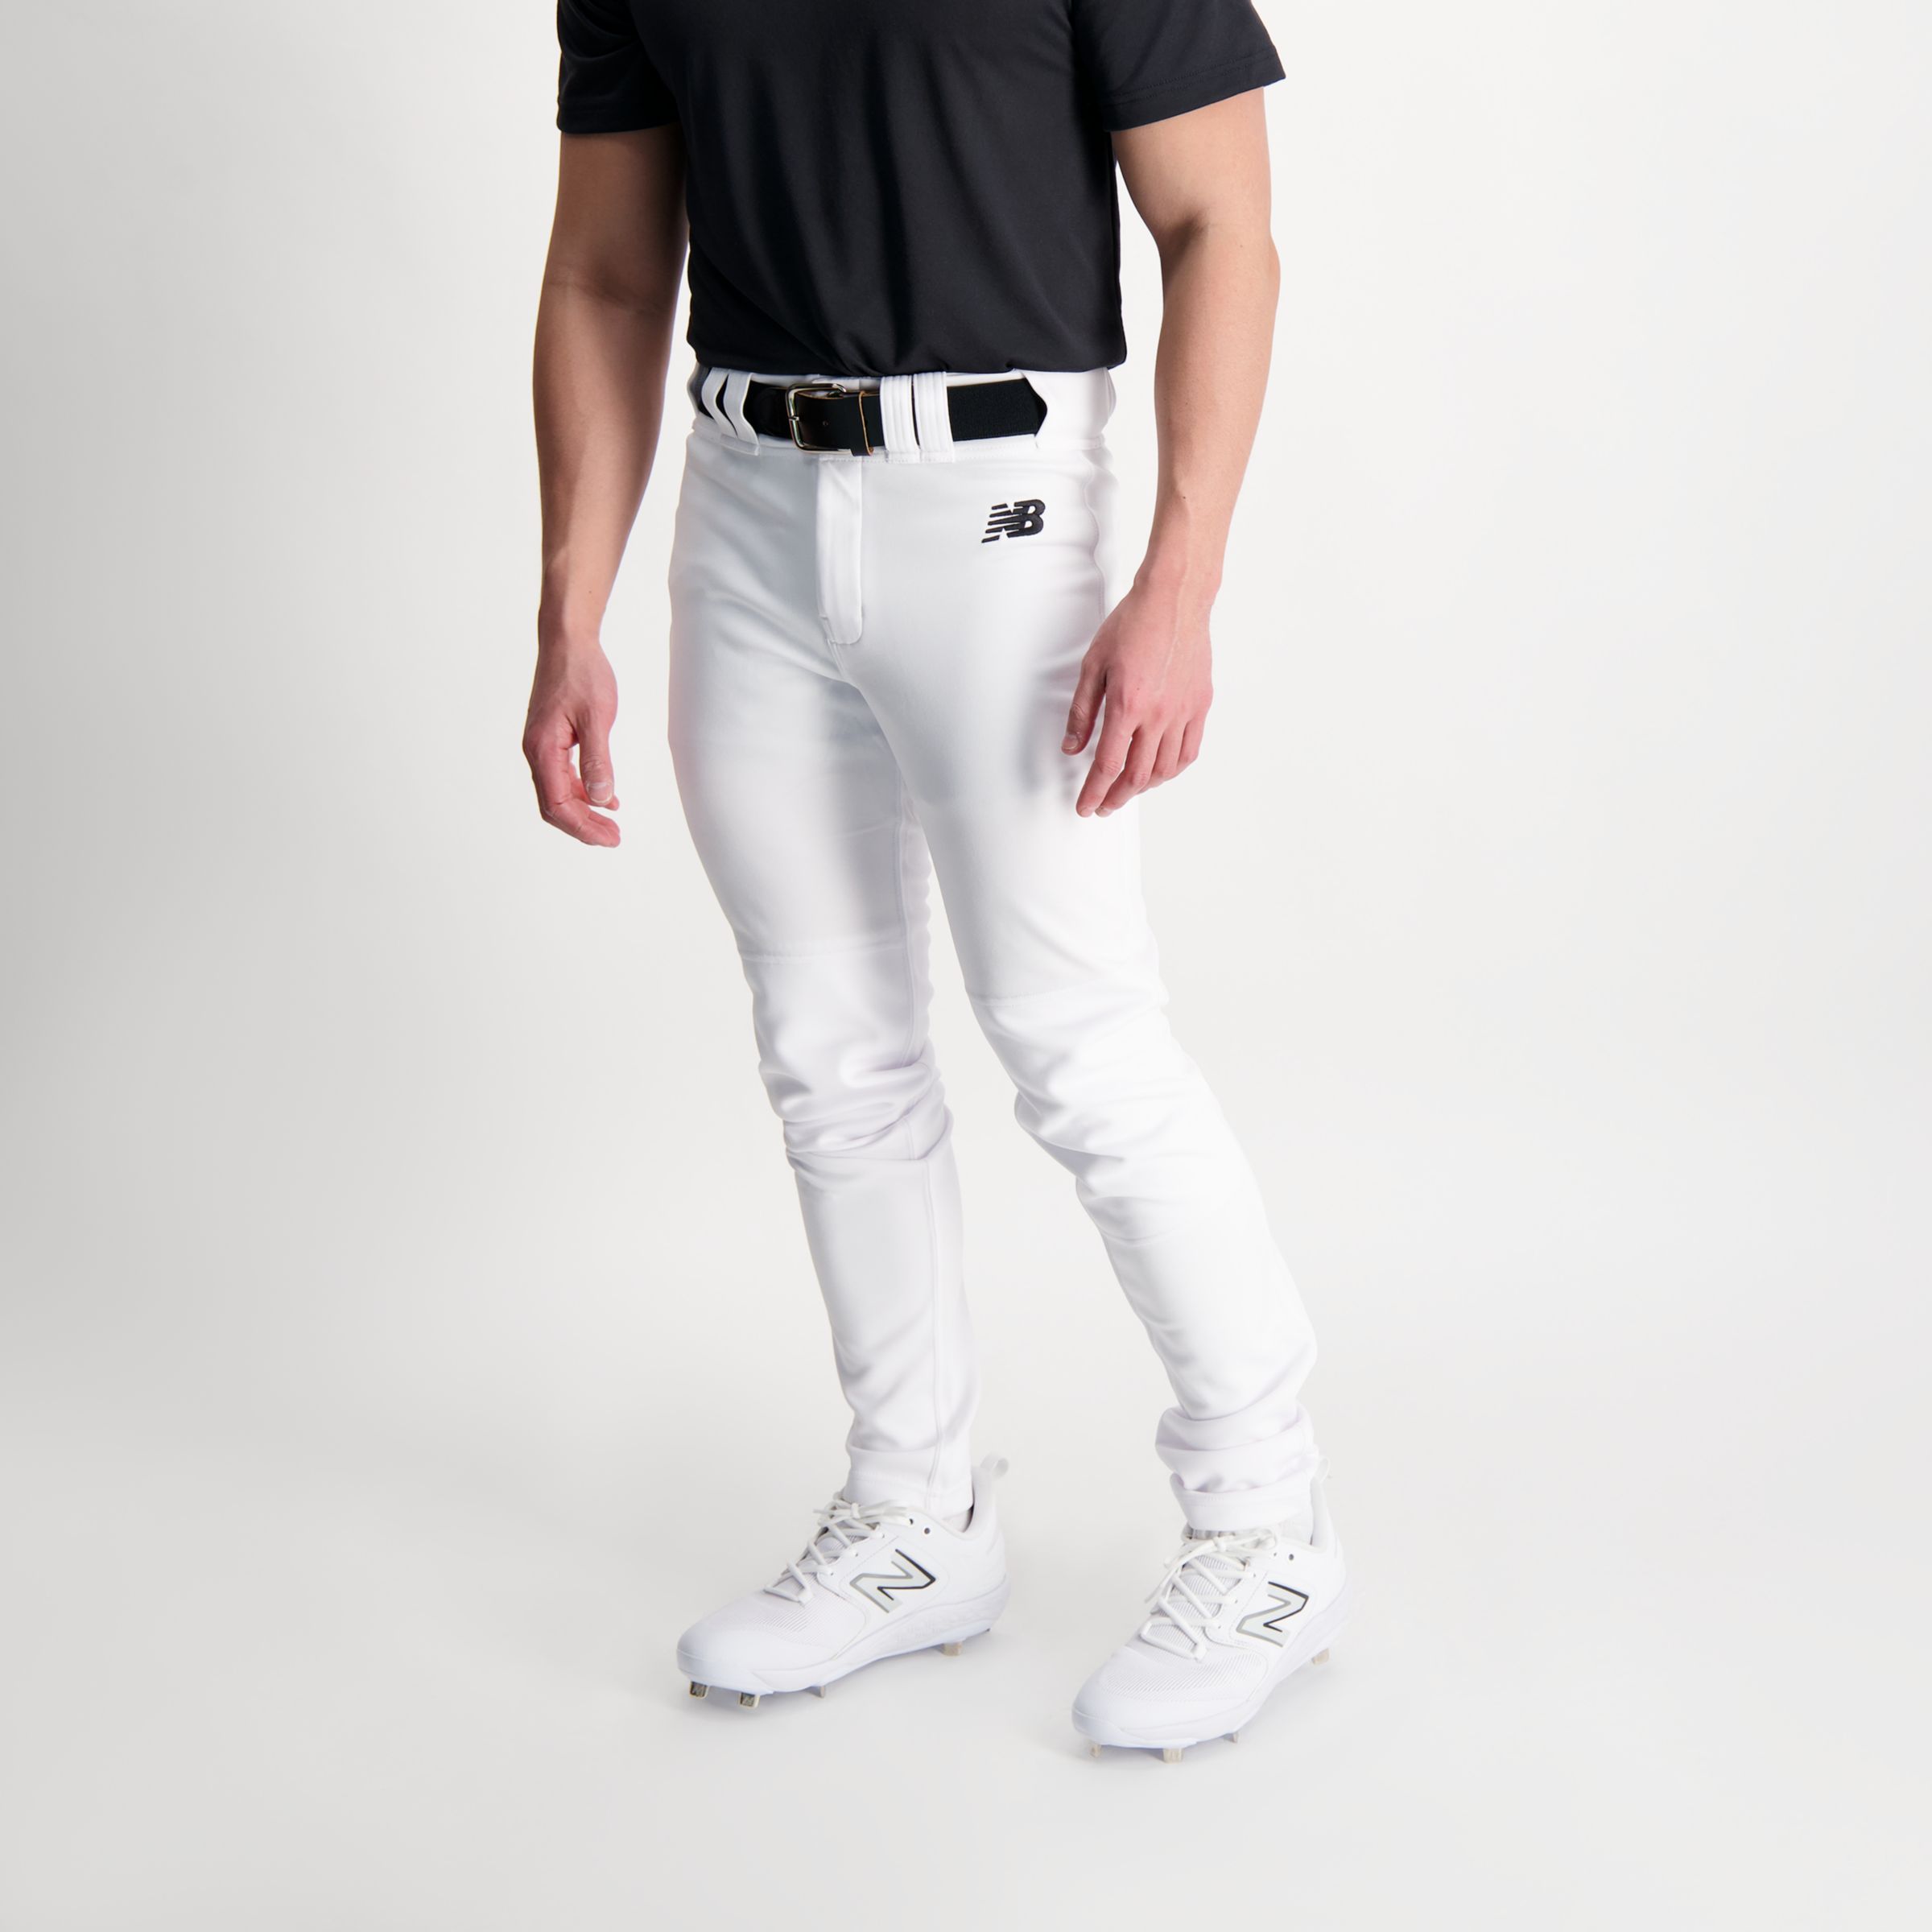 NB Men's Adversary 2.0 Tapered Piped Pant